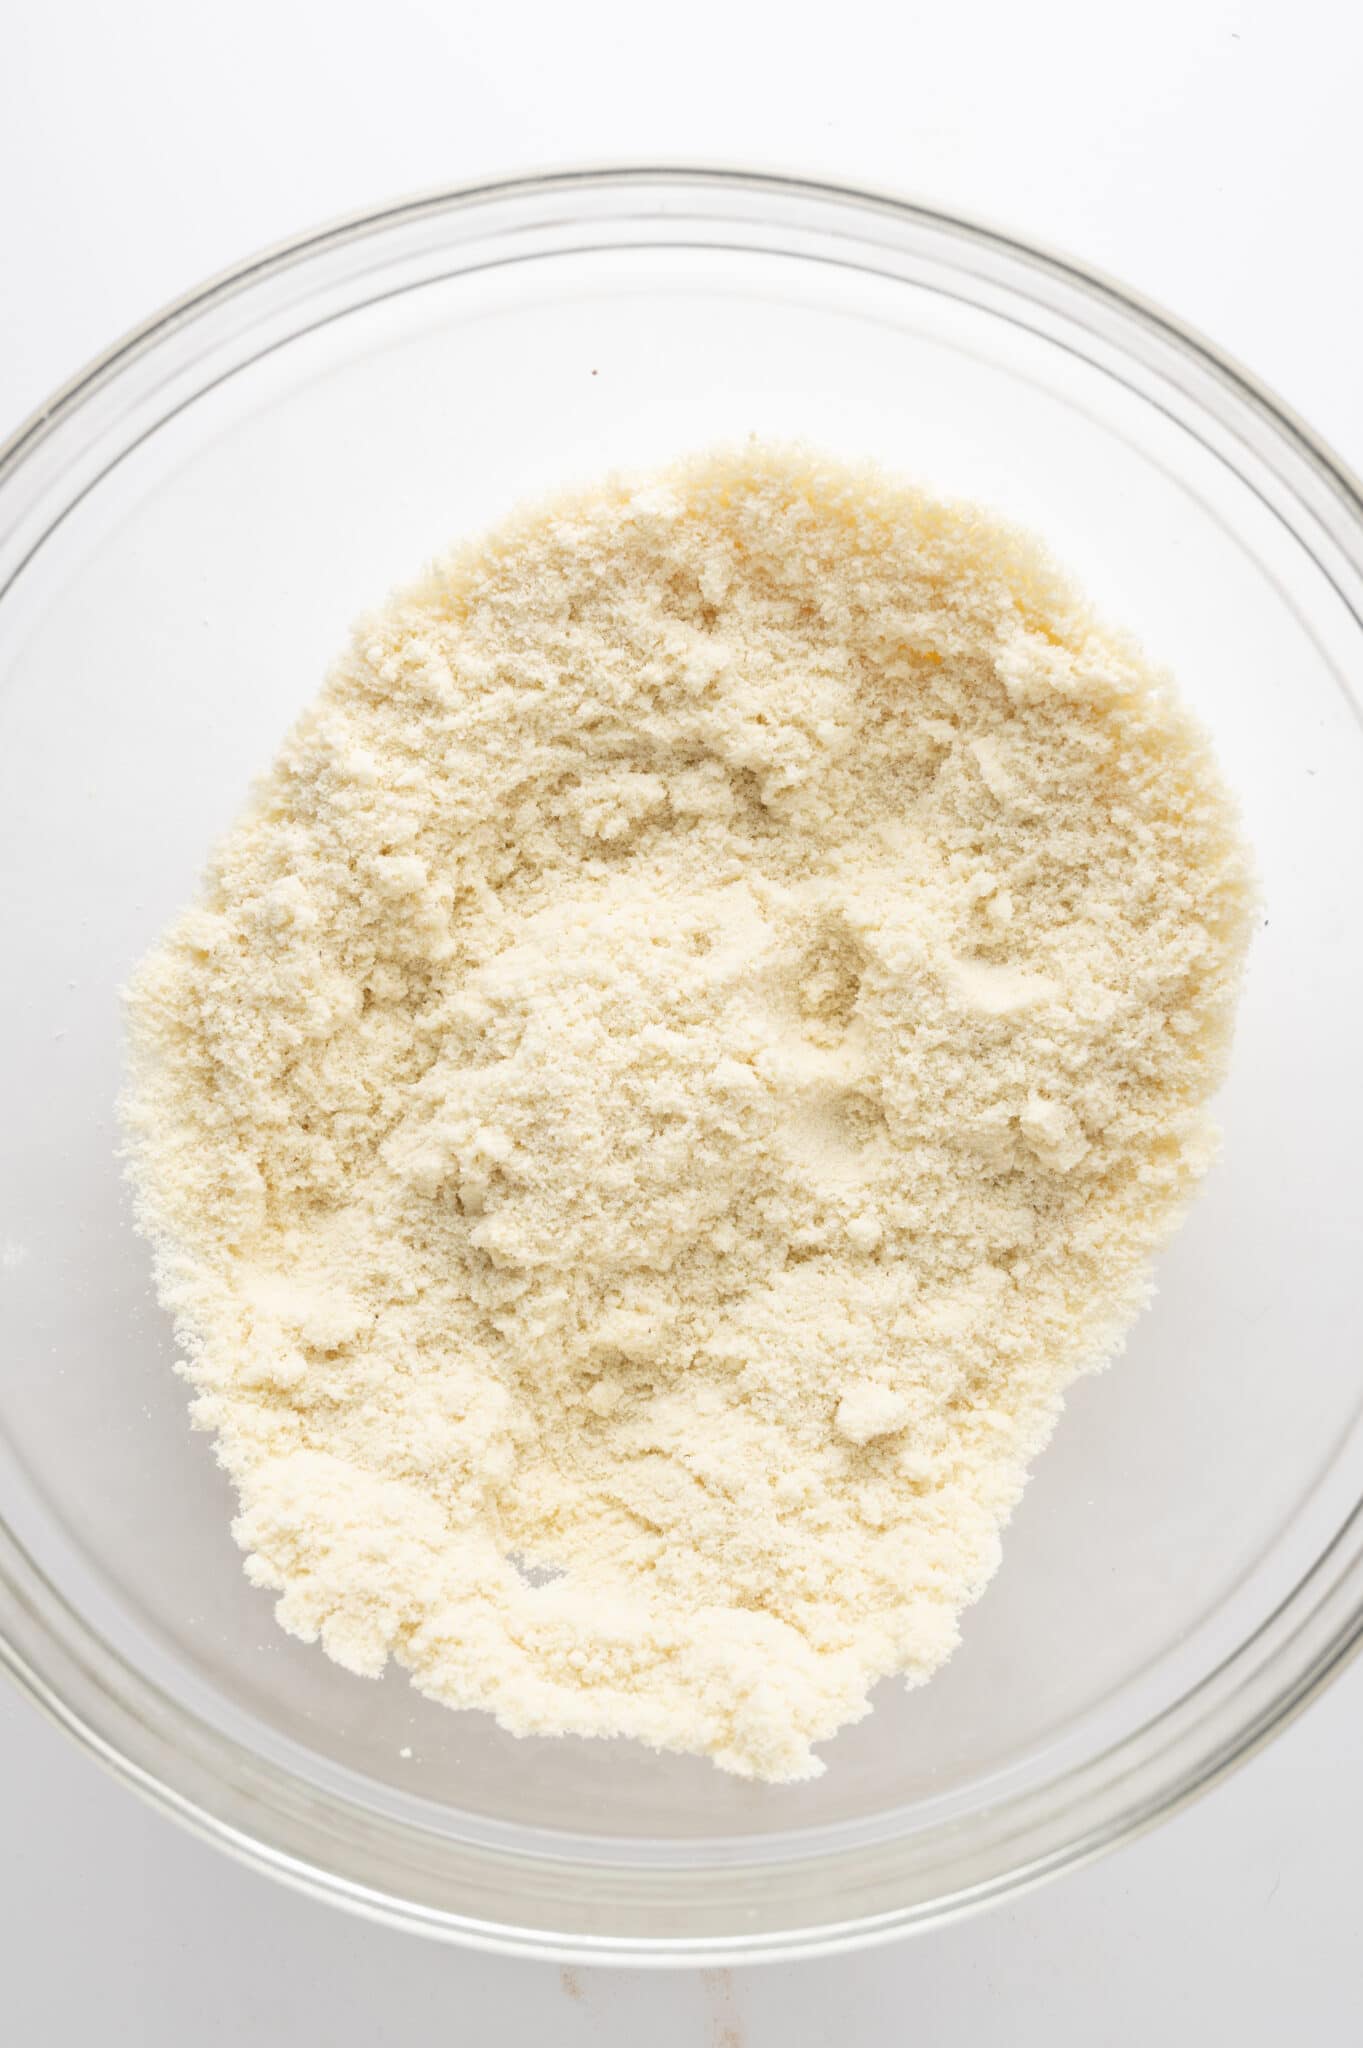 Dry ingredients in a clear bowl against a bright white background.